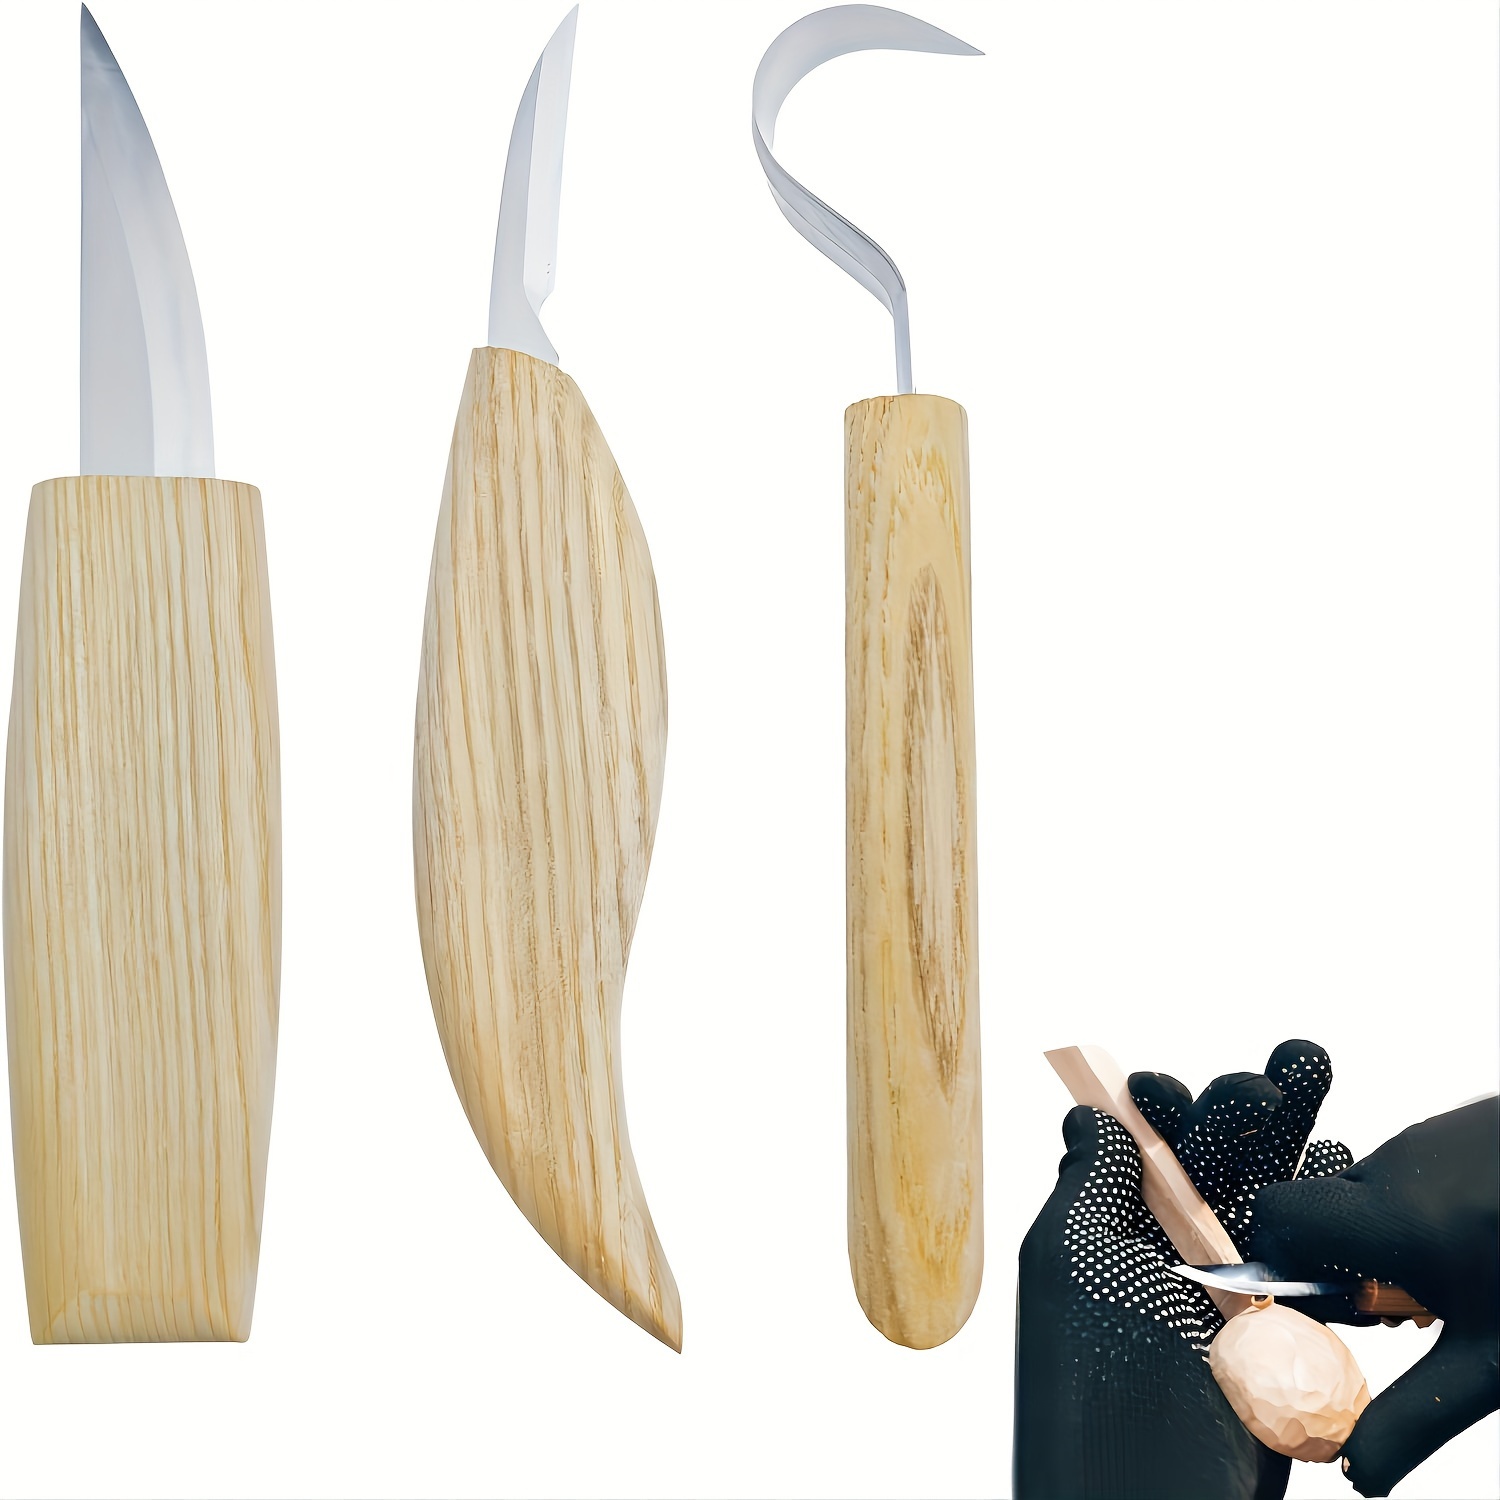 Wood Carving Hook Knife and Sloyd Knife for Carving/Whittling/roughing -  for Carving Spoons, Bowls, kuska, and Cups. Right Handed- Great for  Beginners